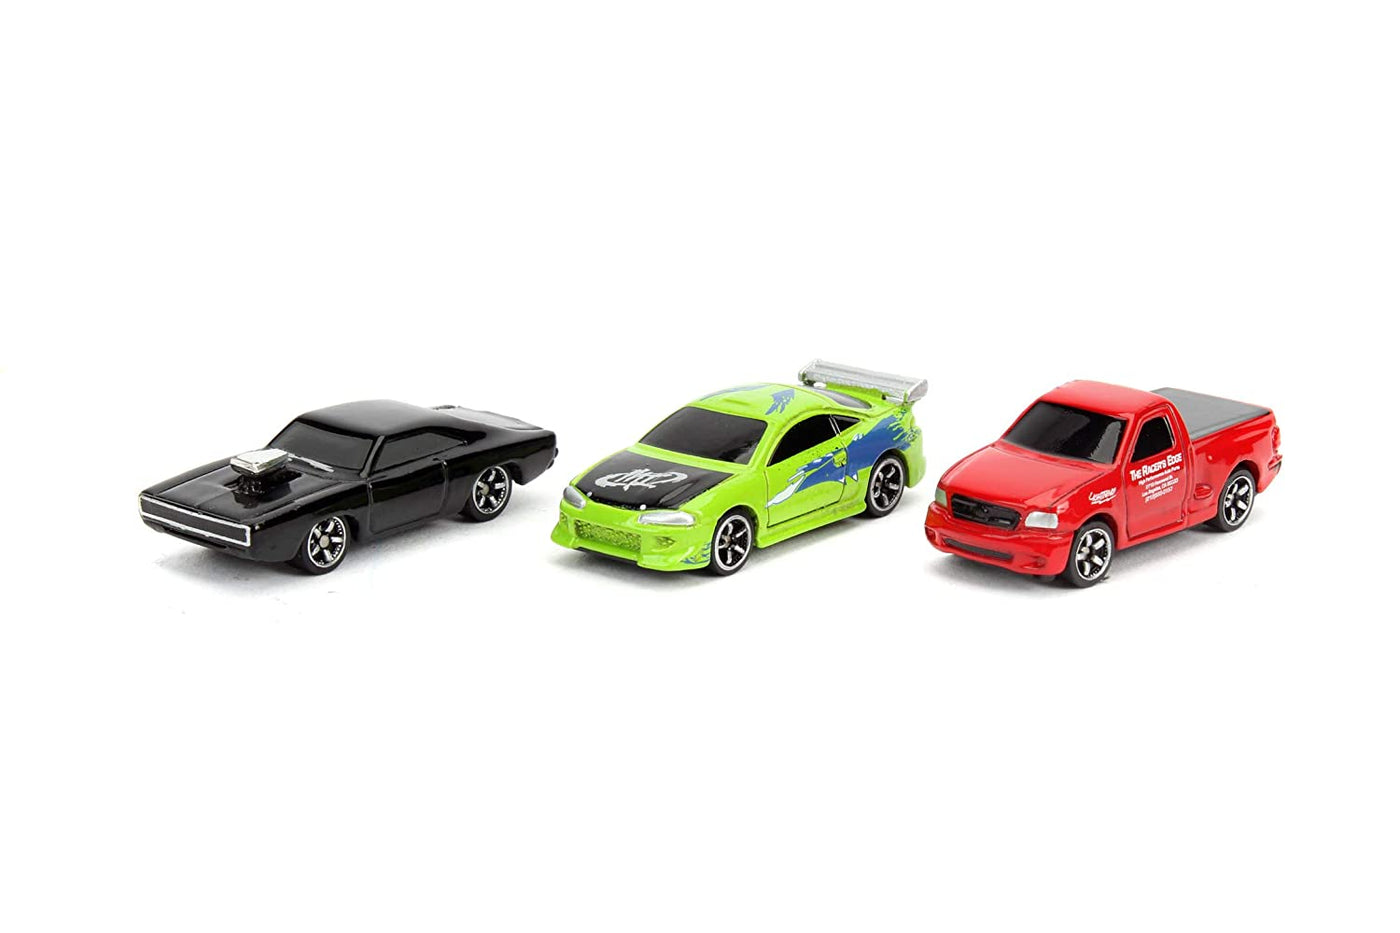 Fast & Furious Nano Hollywood Rides NV-1 Die-cast Cars (1:75 Scale) Pack of 3 | Jada Toys